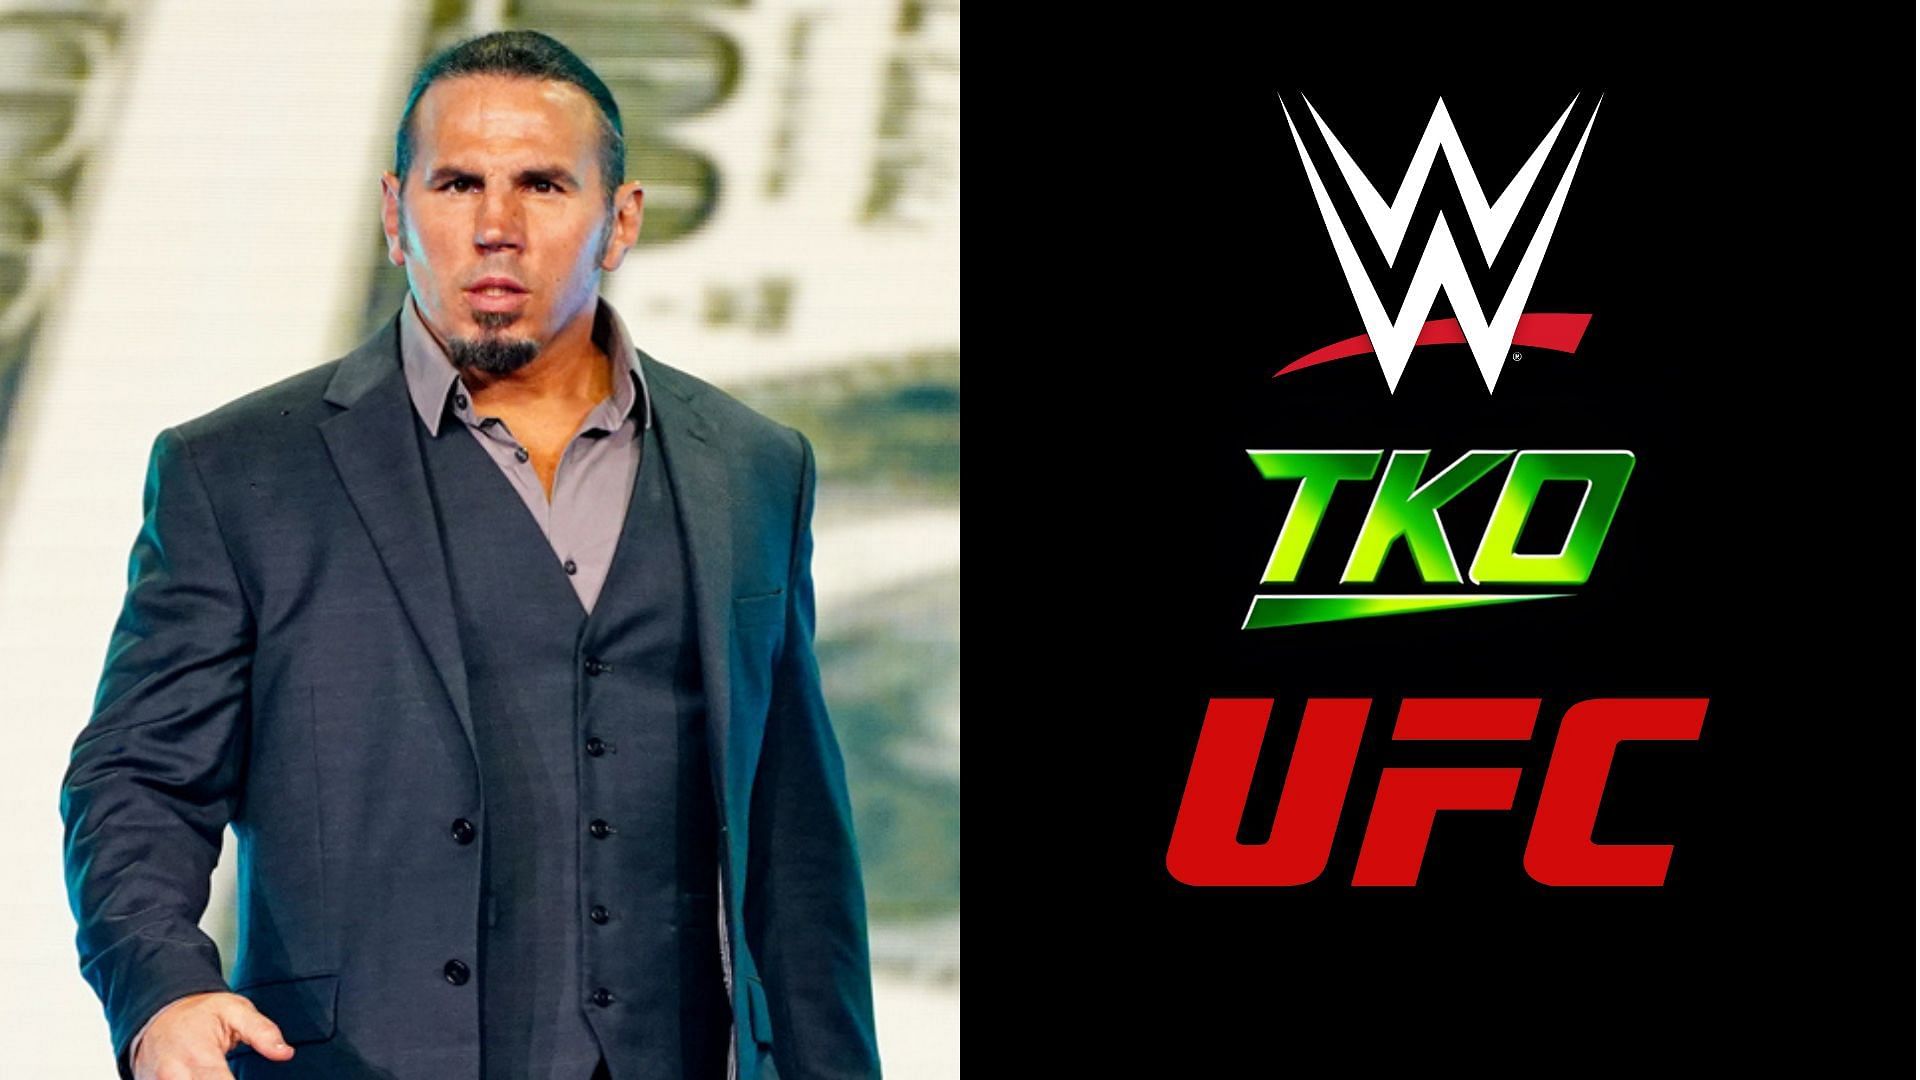 Matt Hardy has weighed in with his thoughts on the WWE/UFC merger